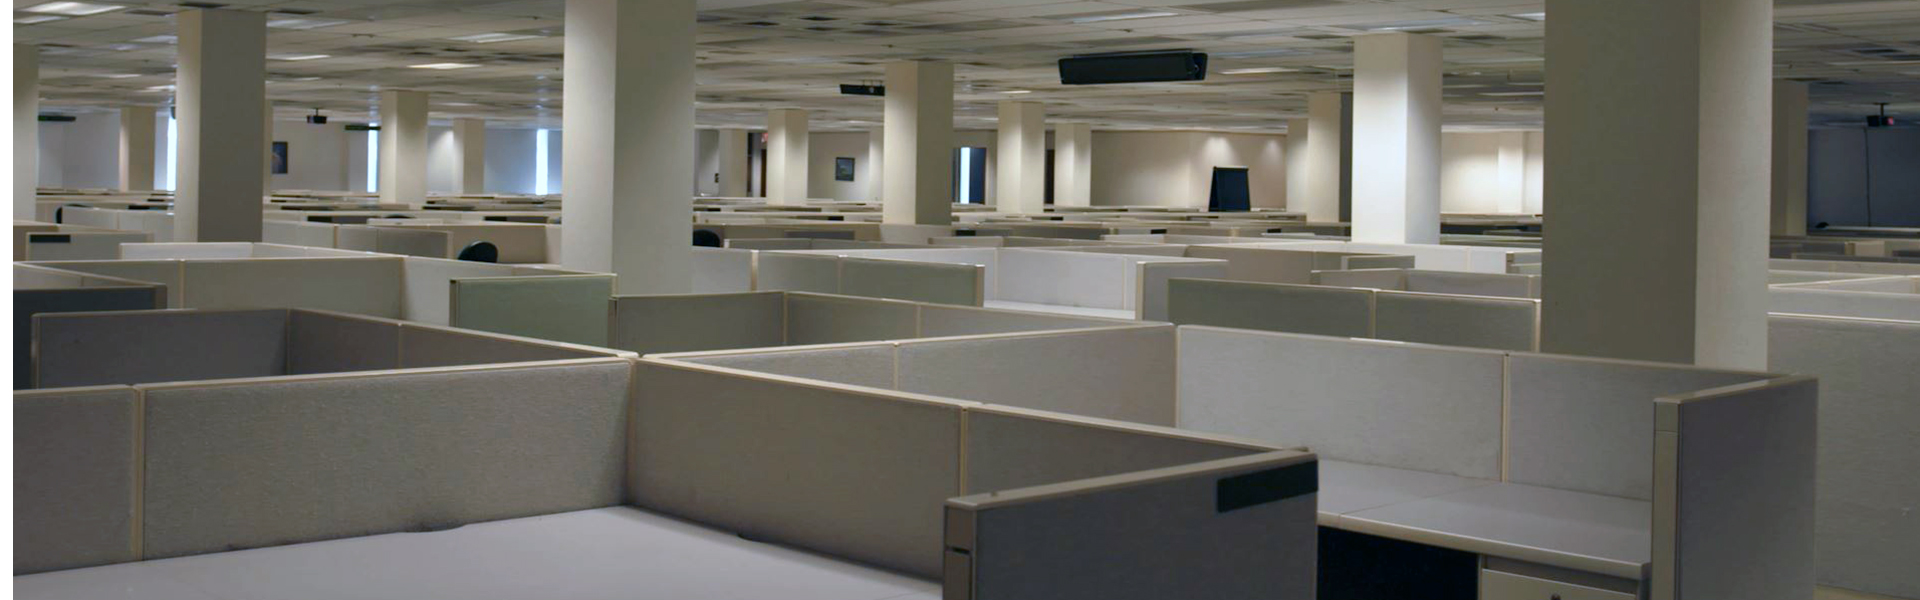 Commercial area cubicles